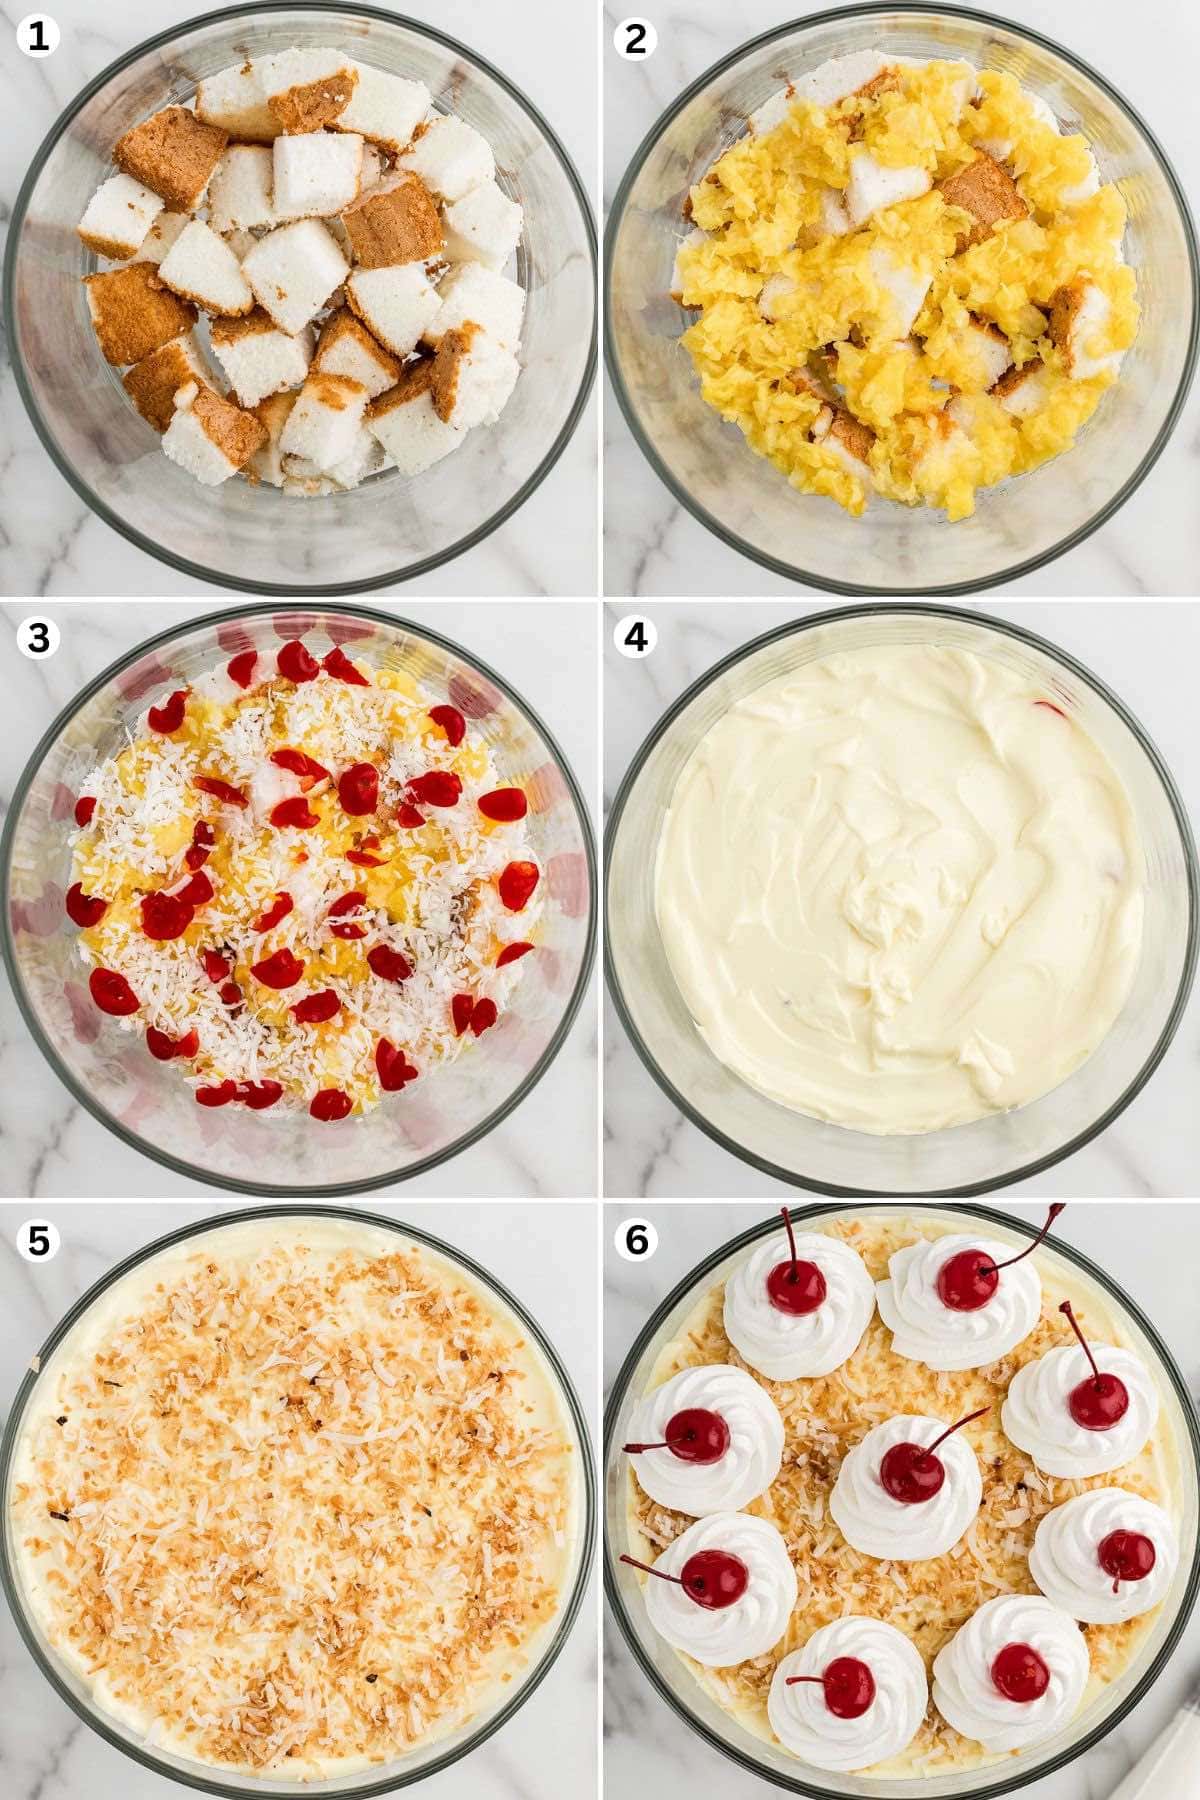 Place a layer cake cubes into the bottom of a large trifle bowl. Add the pineapple. Sprinkle on non-toasted shredded coconut and cover with chopped cherries. Spread the pudding mixture. Repeat the layer and top of the trifle with the toasted coconut. Pipe a dollop of cool whip and op each dollop with a stemmed cherry.